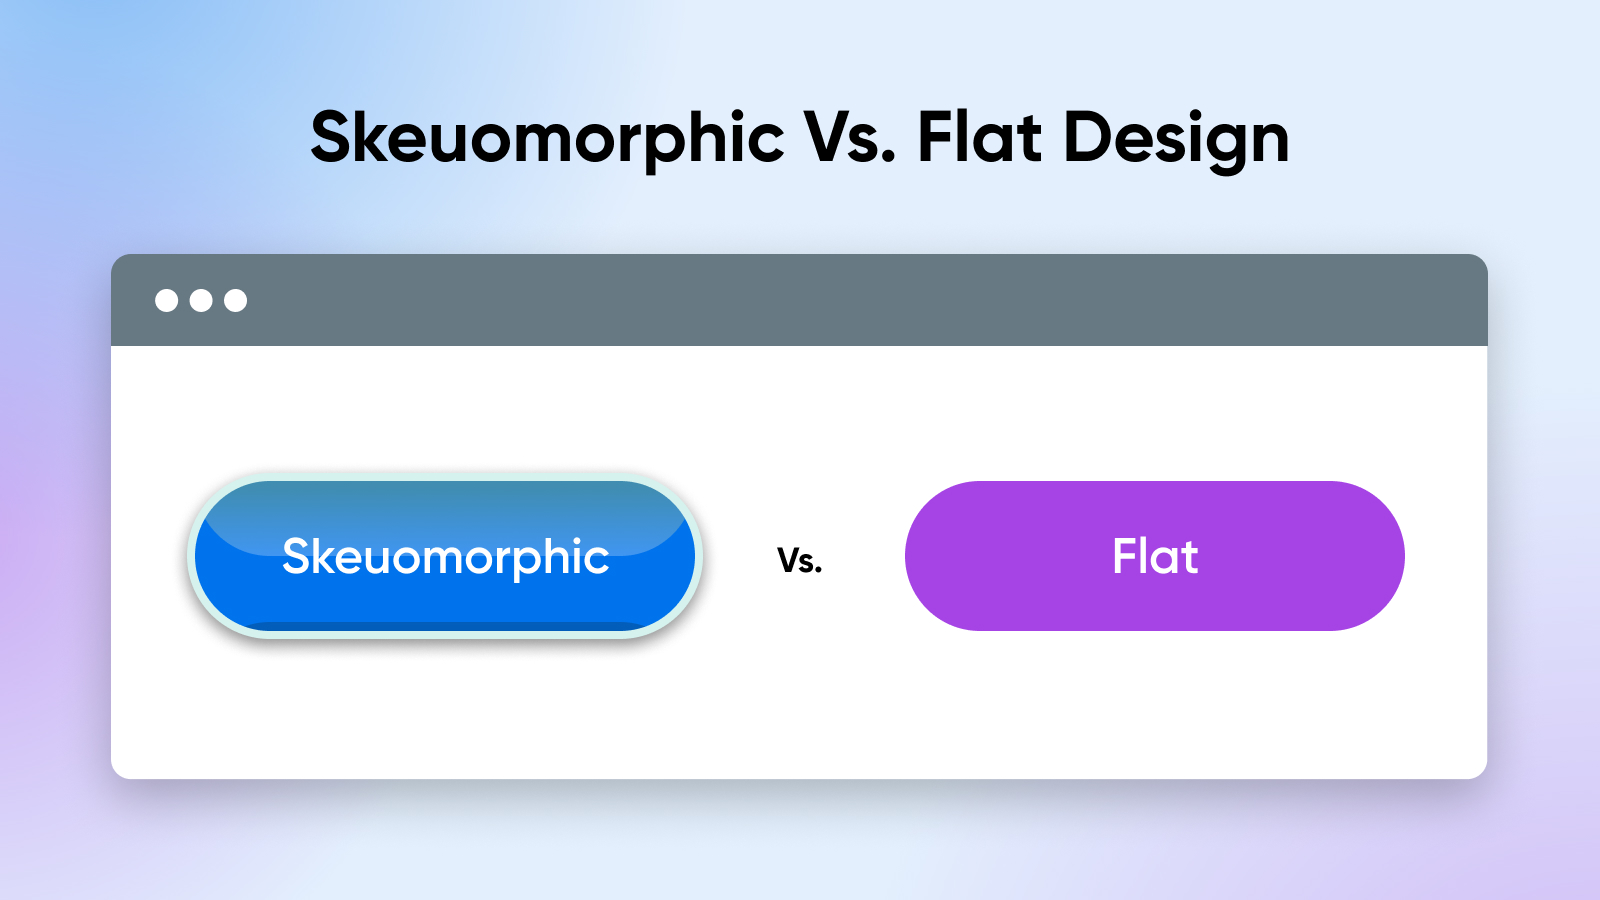 skeuomorphic button (with dimension as if the button is coming off the page) vs. flat button (1 dimension) 